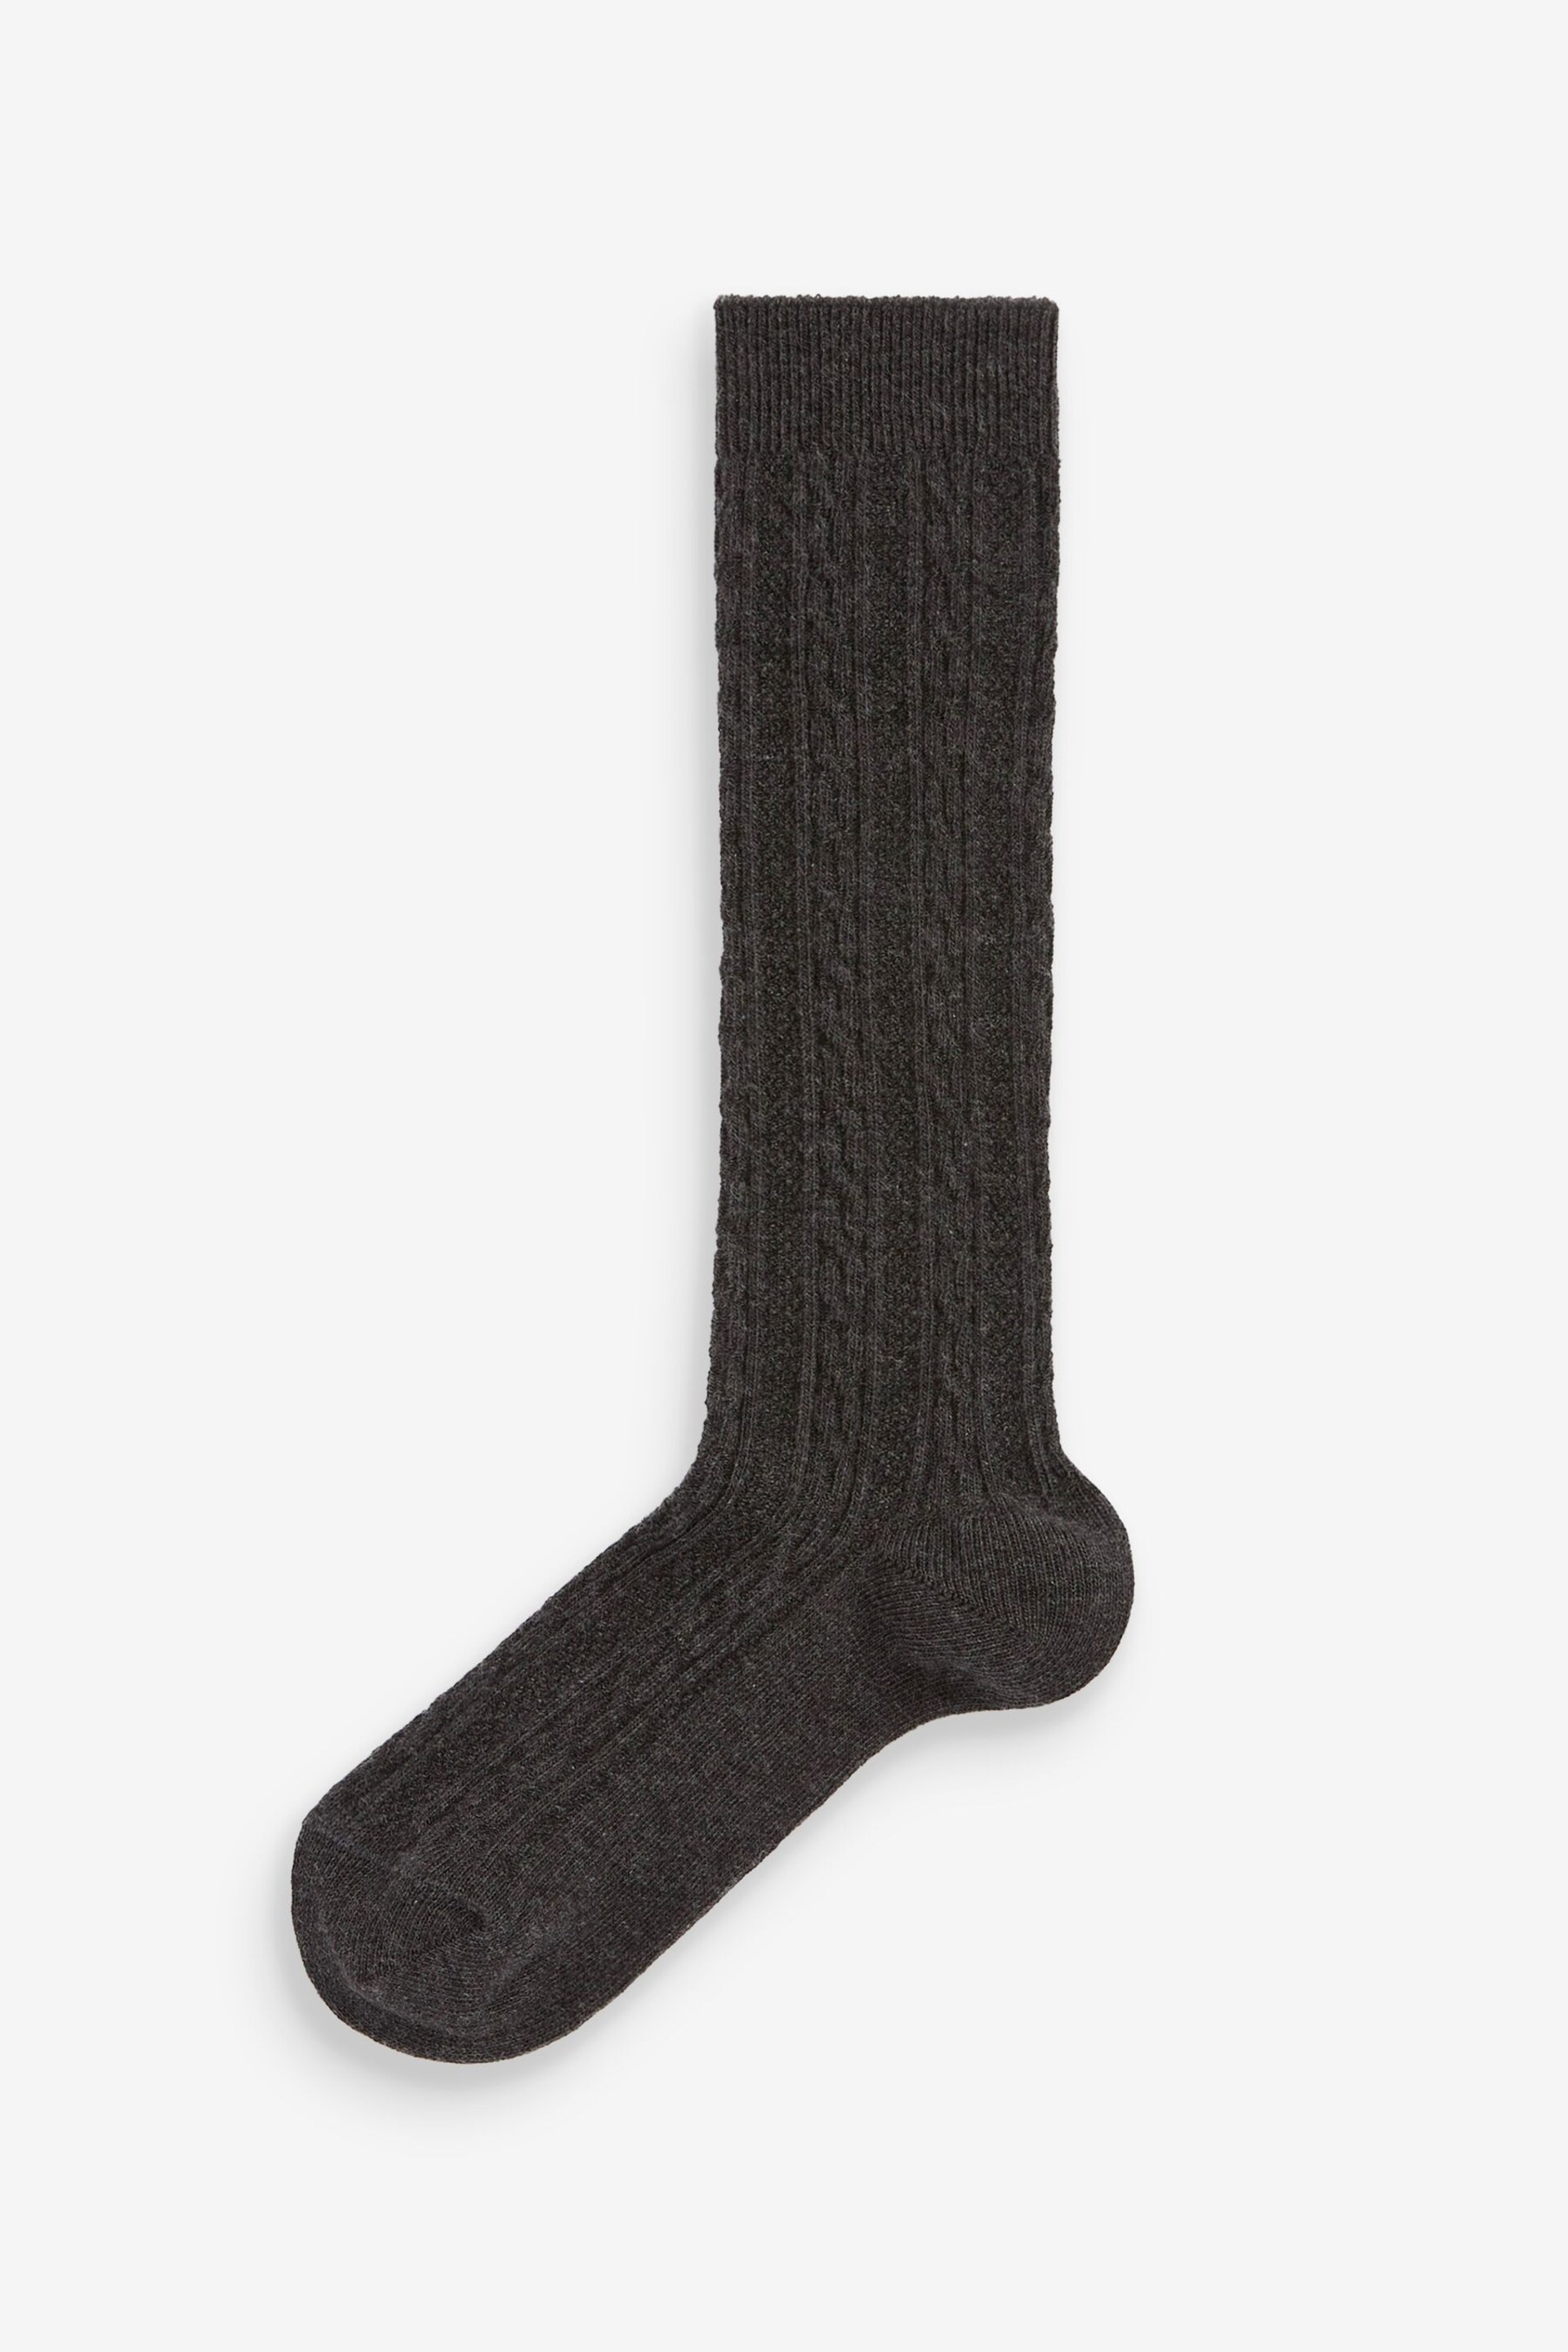 Grey 3 Pack Cable Cotton Rich Knee High School Socks - Image 3 of 4